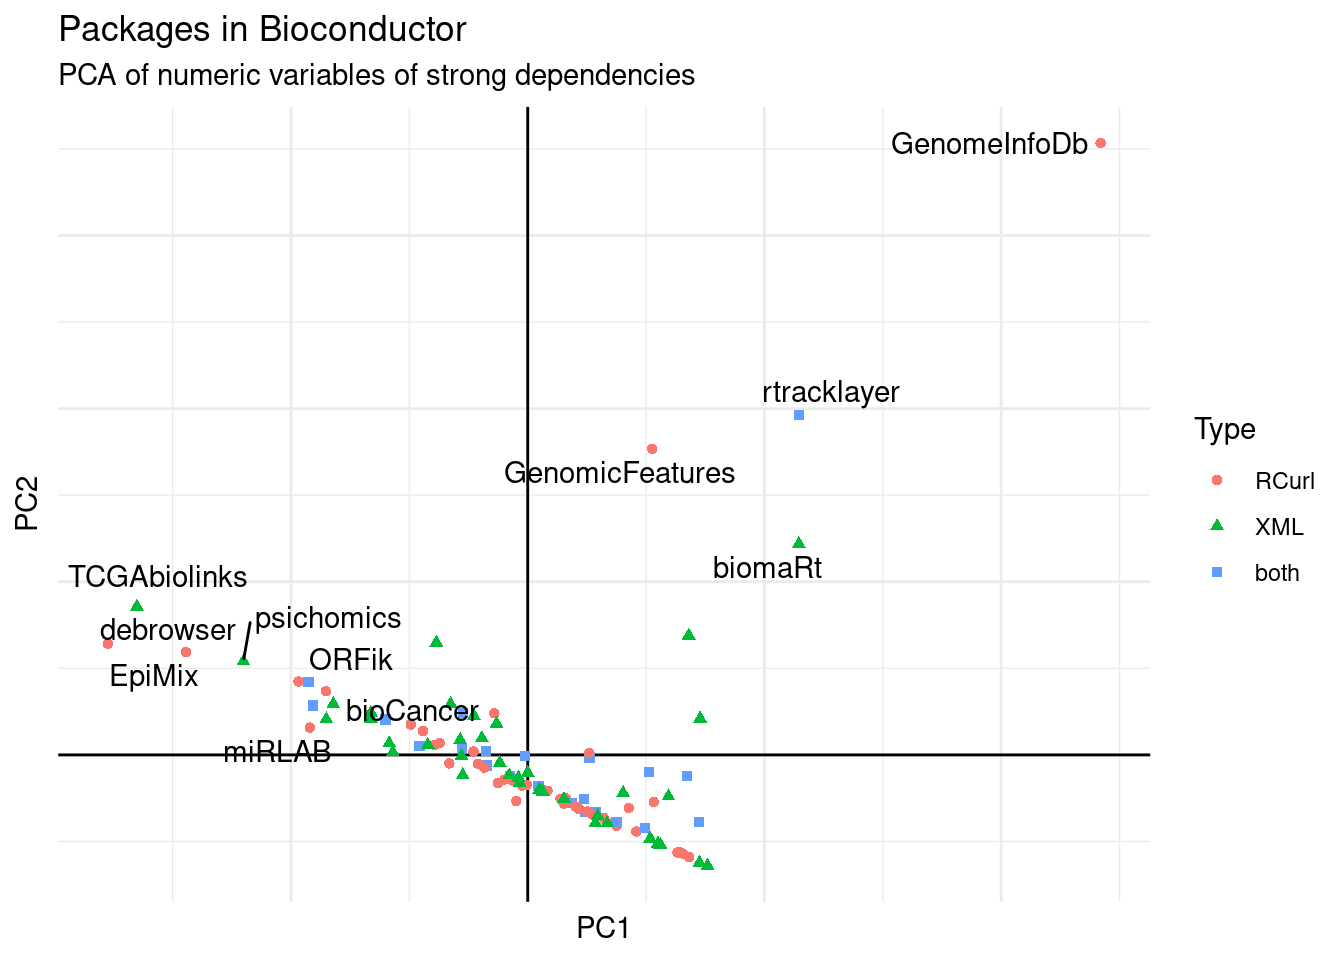 PCA of packages on Bioconductor.